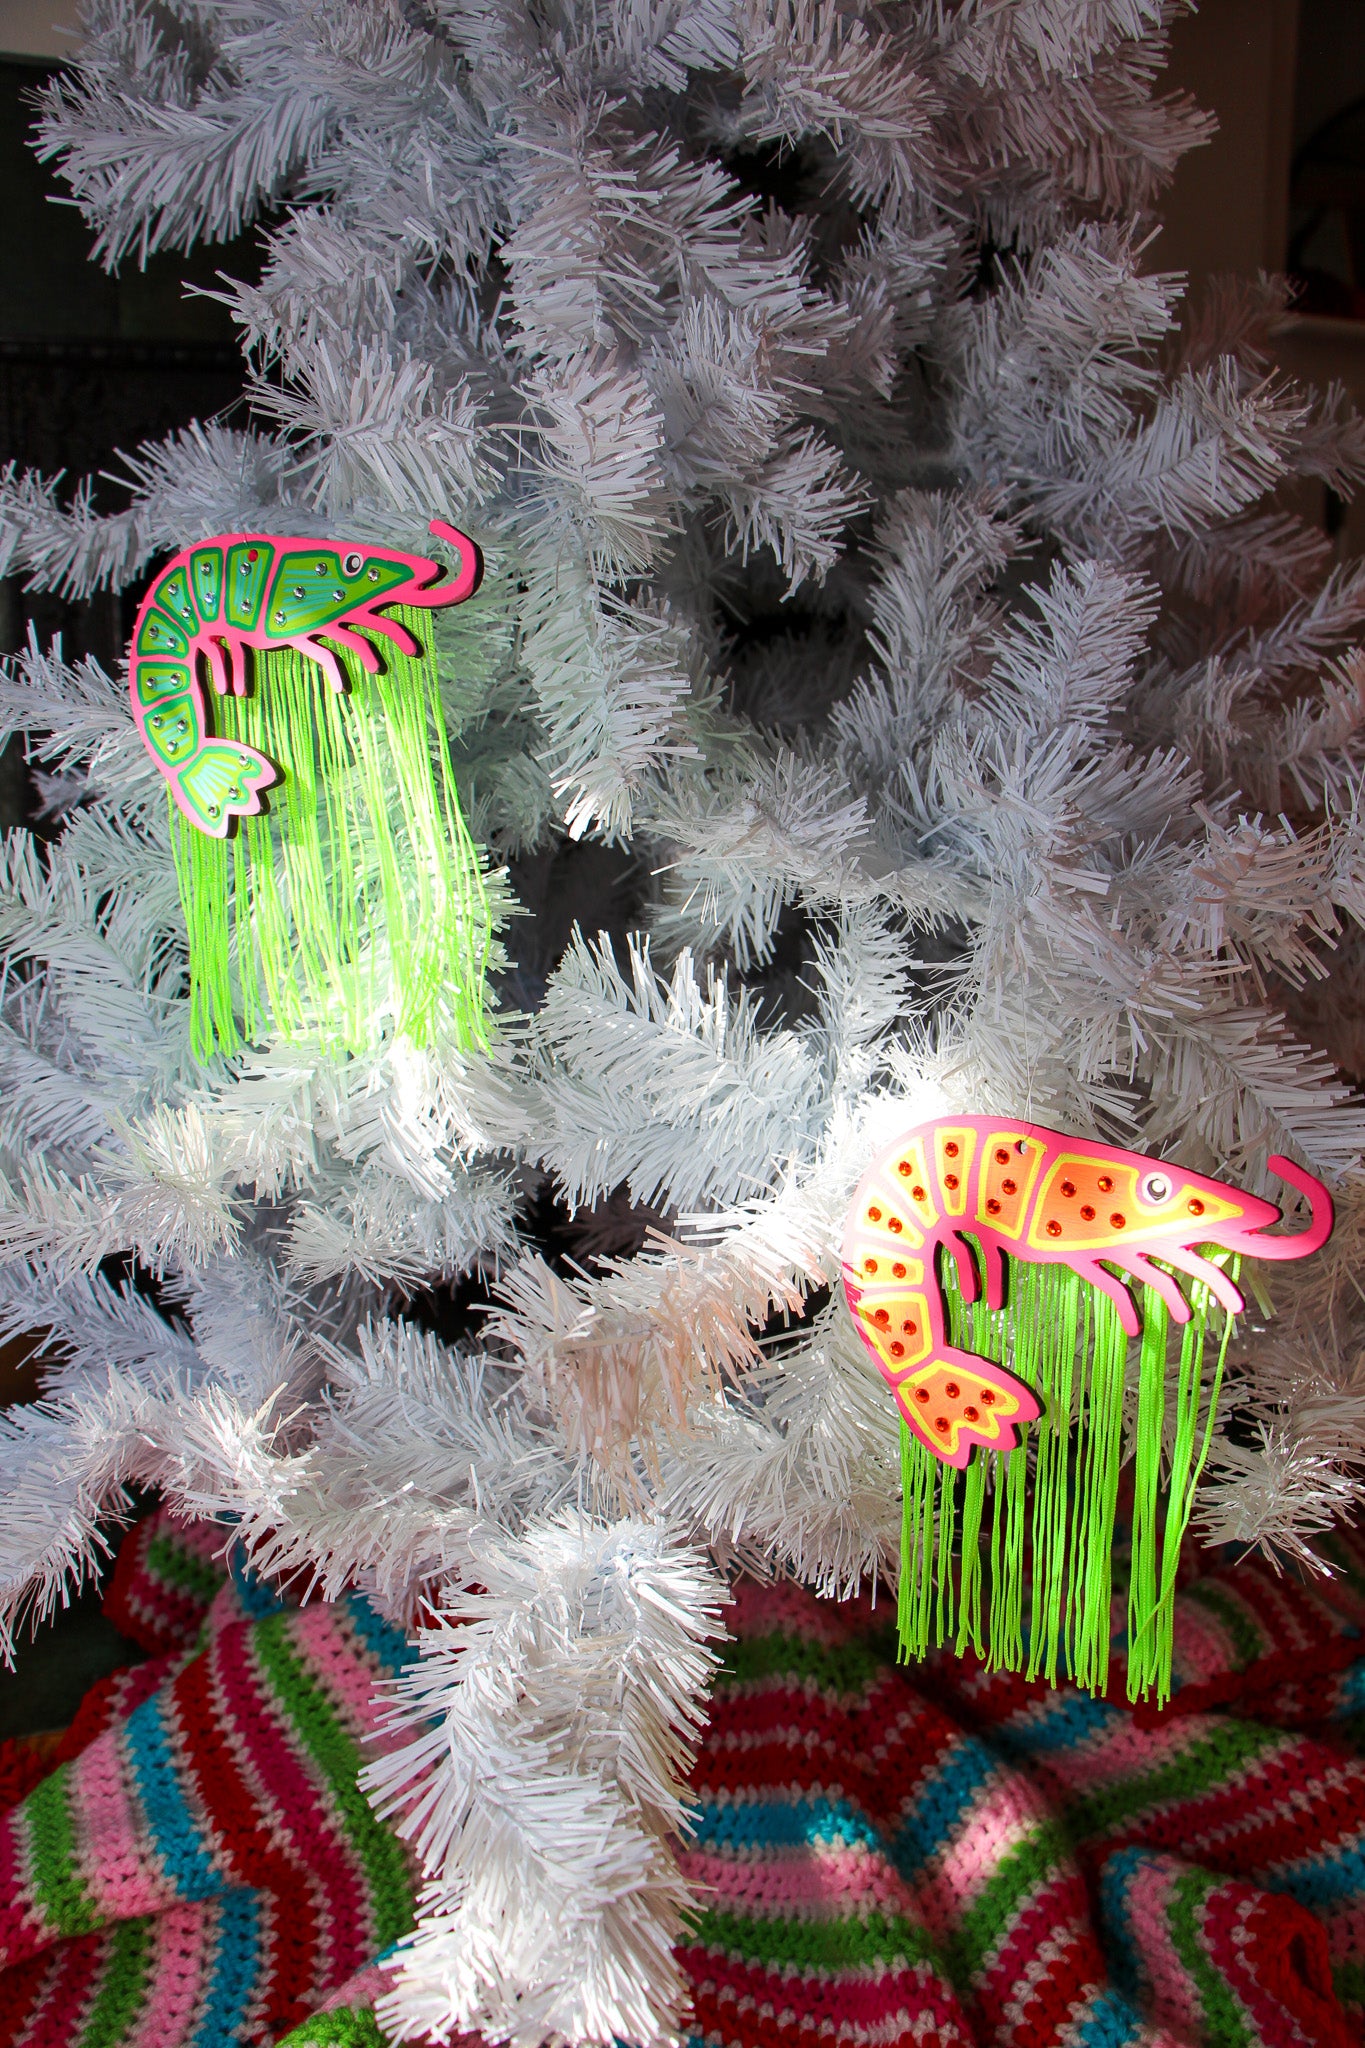 Pink and Green Shrimp Ornament with Green Fringe